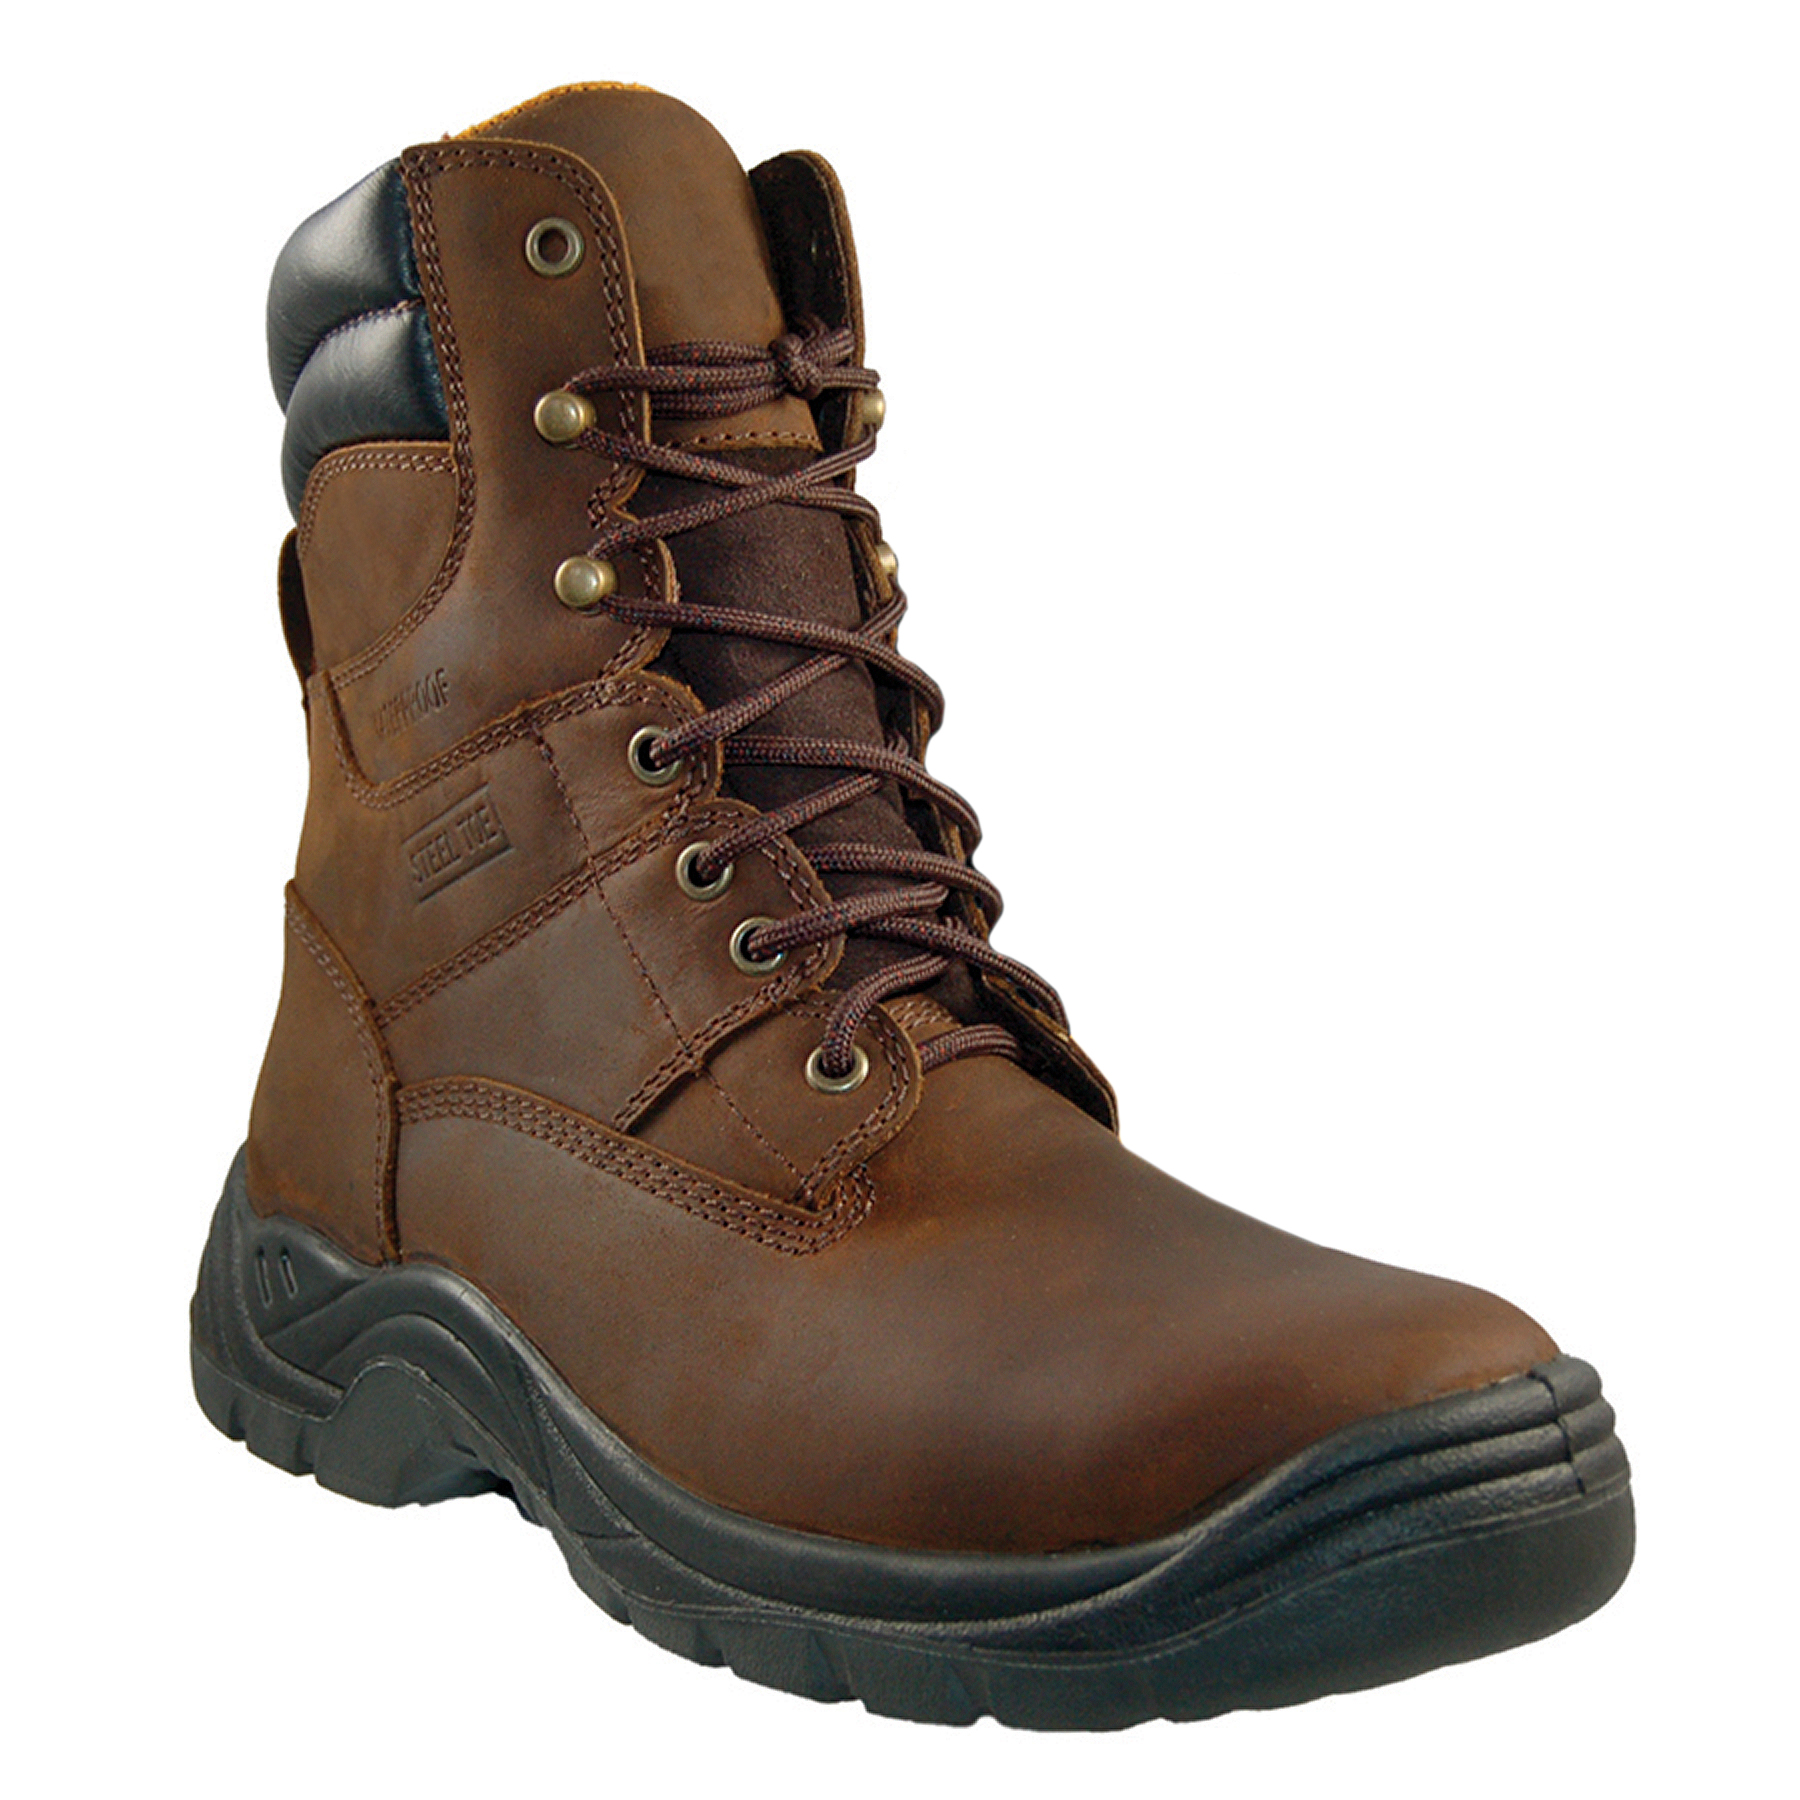 Itasca Men's 8" Safety Toe Leather Boots